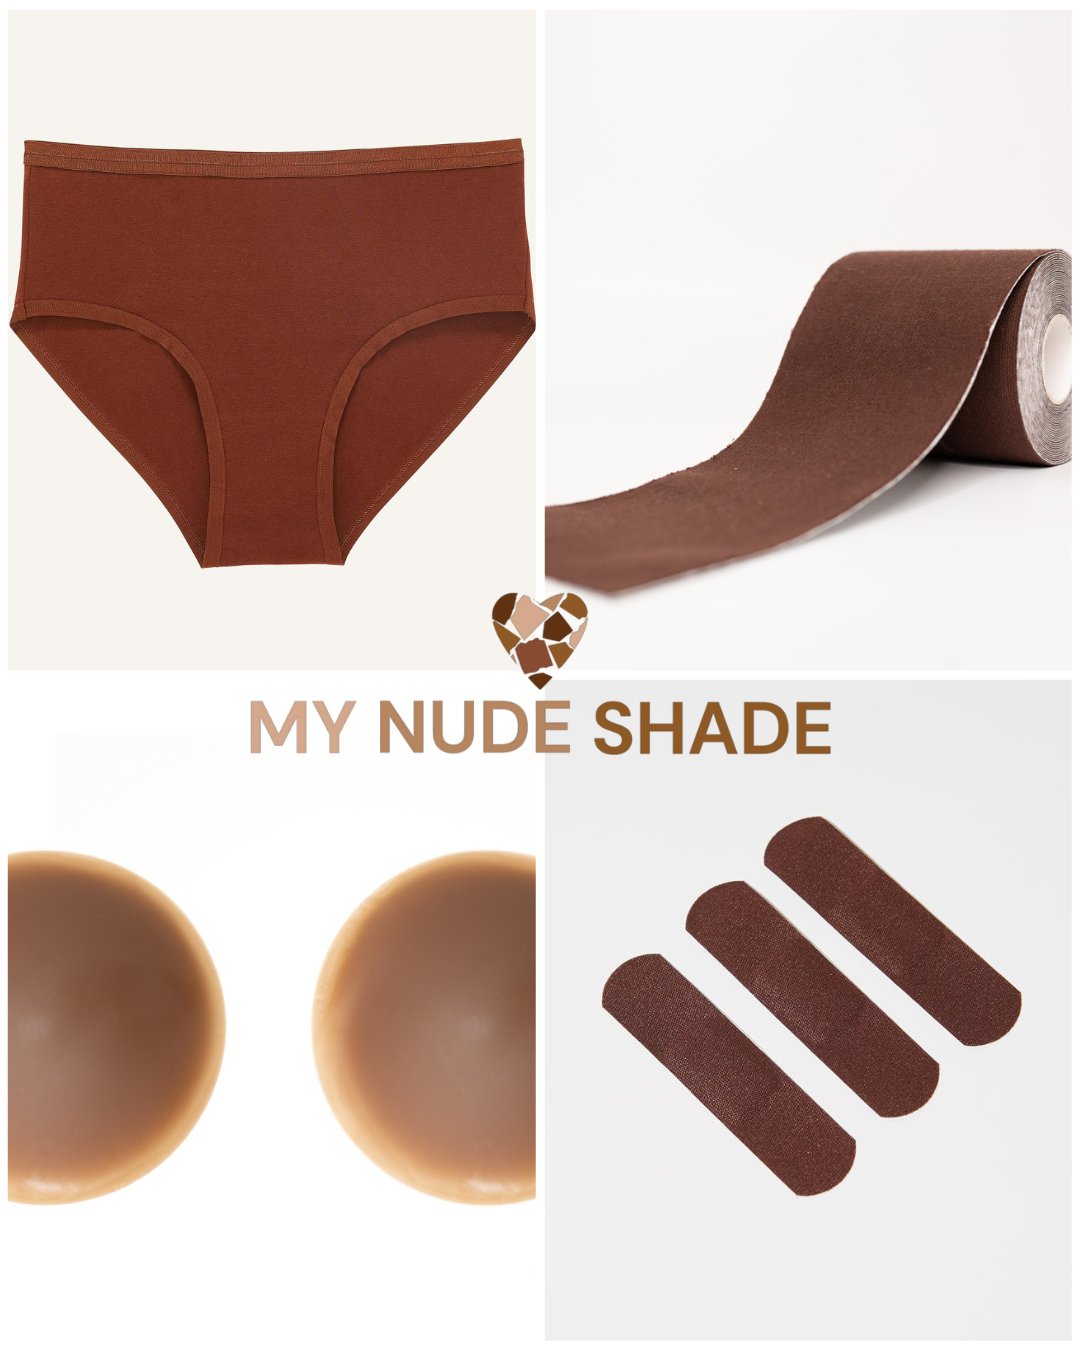 A pair of dark brown mid-rise briefs, a dark brown boob tape, dark brown silicone nipple covers, and three dark brown bandages for brown skin on a white background with a My Nude Shade logo.